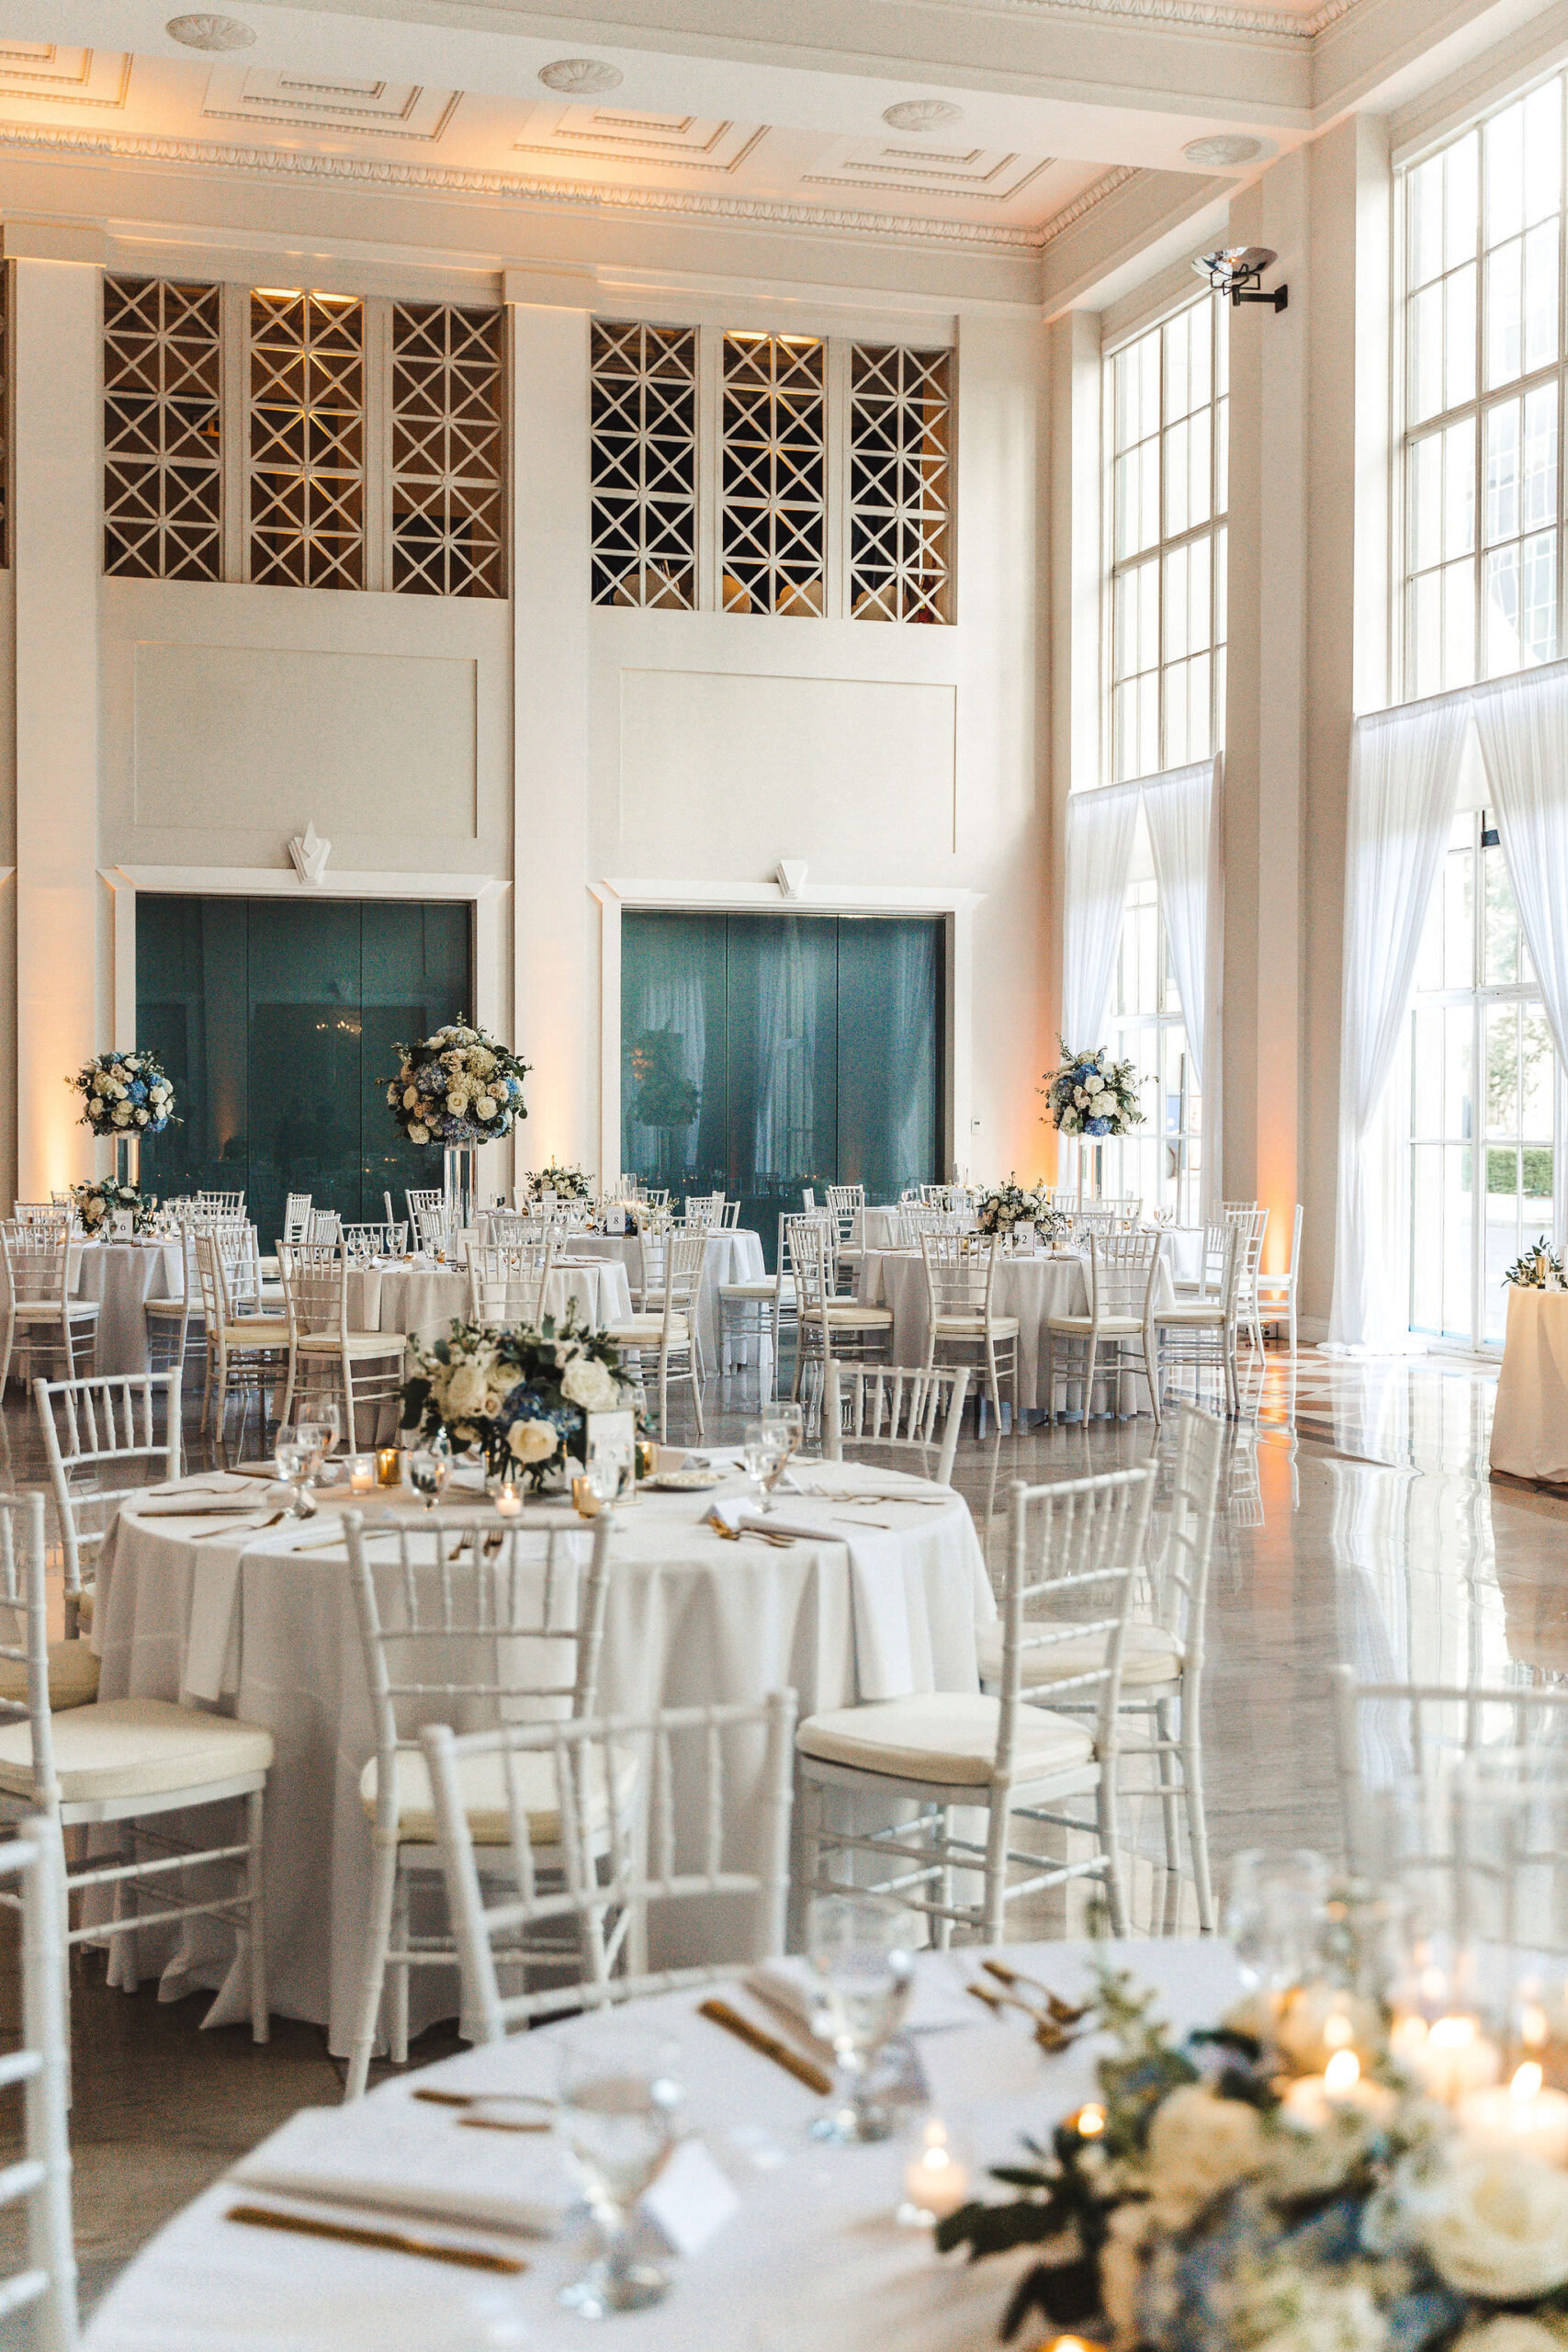 White Chiavari Chairs and Linen Wedding Reception Ideas | Open Concept with Tall Ceilings and Large Windows | Historic Tampa Bay Venue The Vault